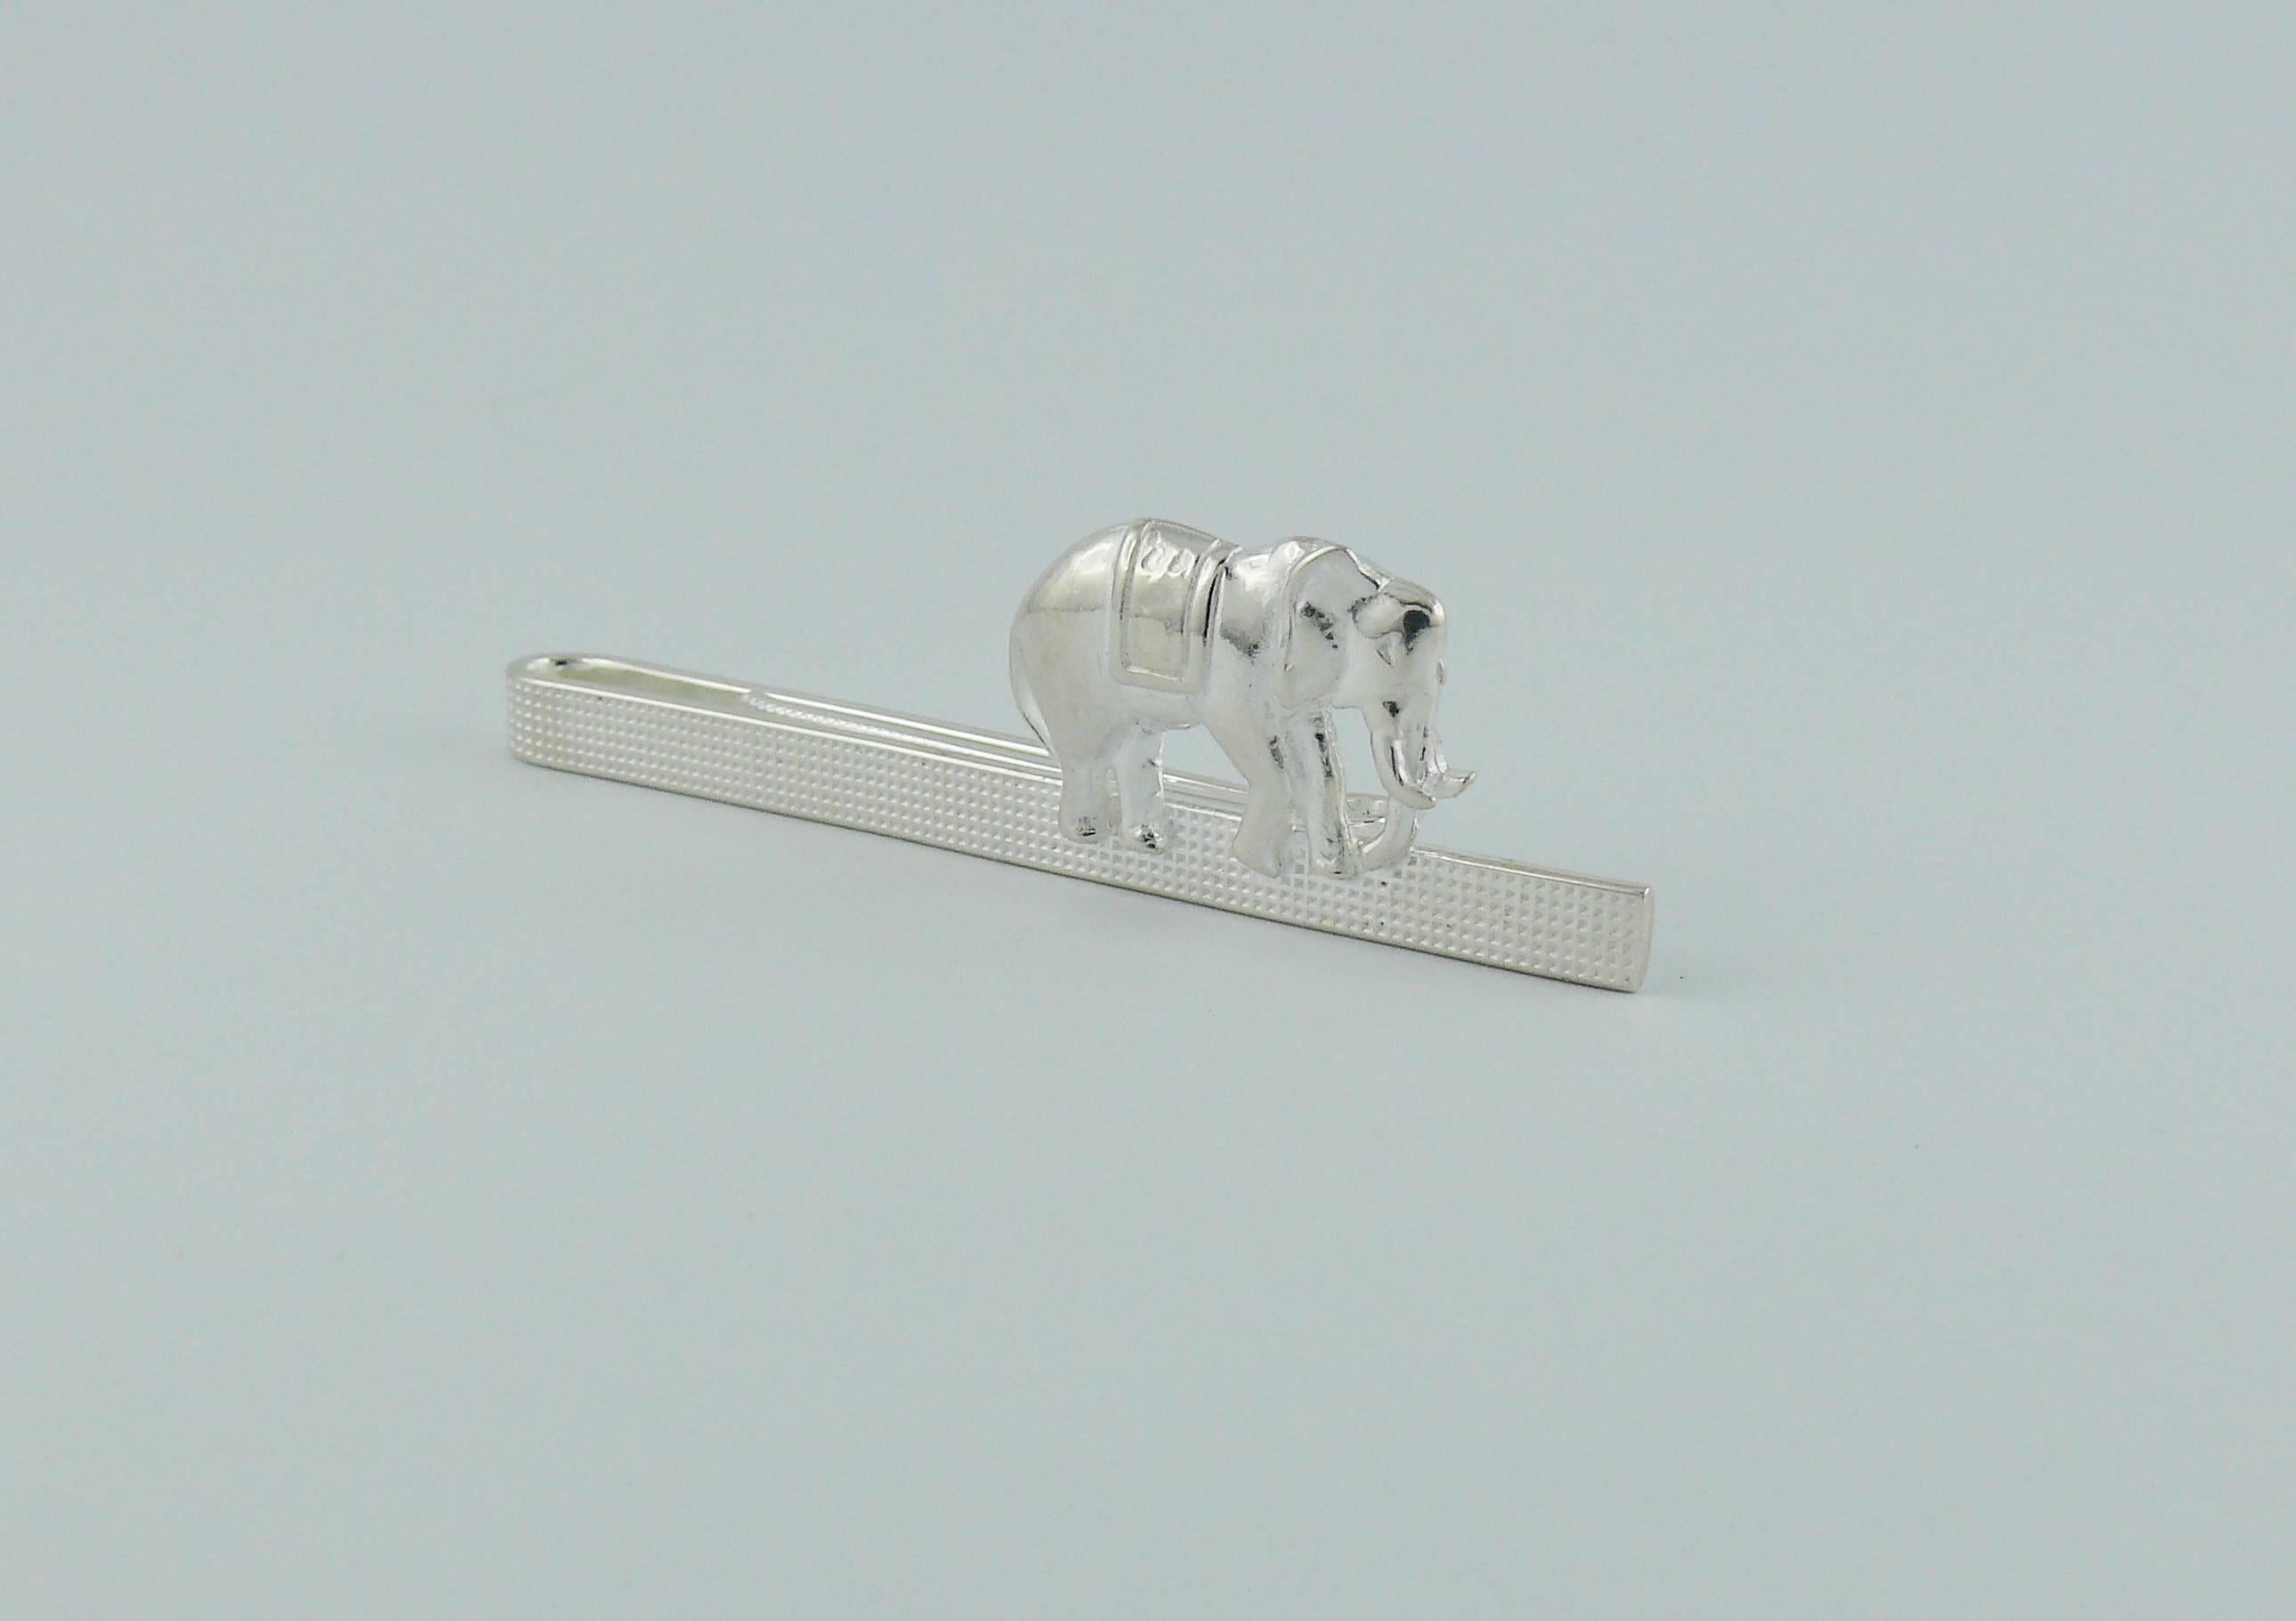 HERMES sterling silver elephant tie clip.

Embossed HERMES.
Fully hallmarked with French sterling silver "Minerve" and maker's hallmark.

Indicative measurements : length approx 6.2 cm (2.44 inches) / max. width approx. 1.6 cm (0.63